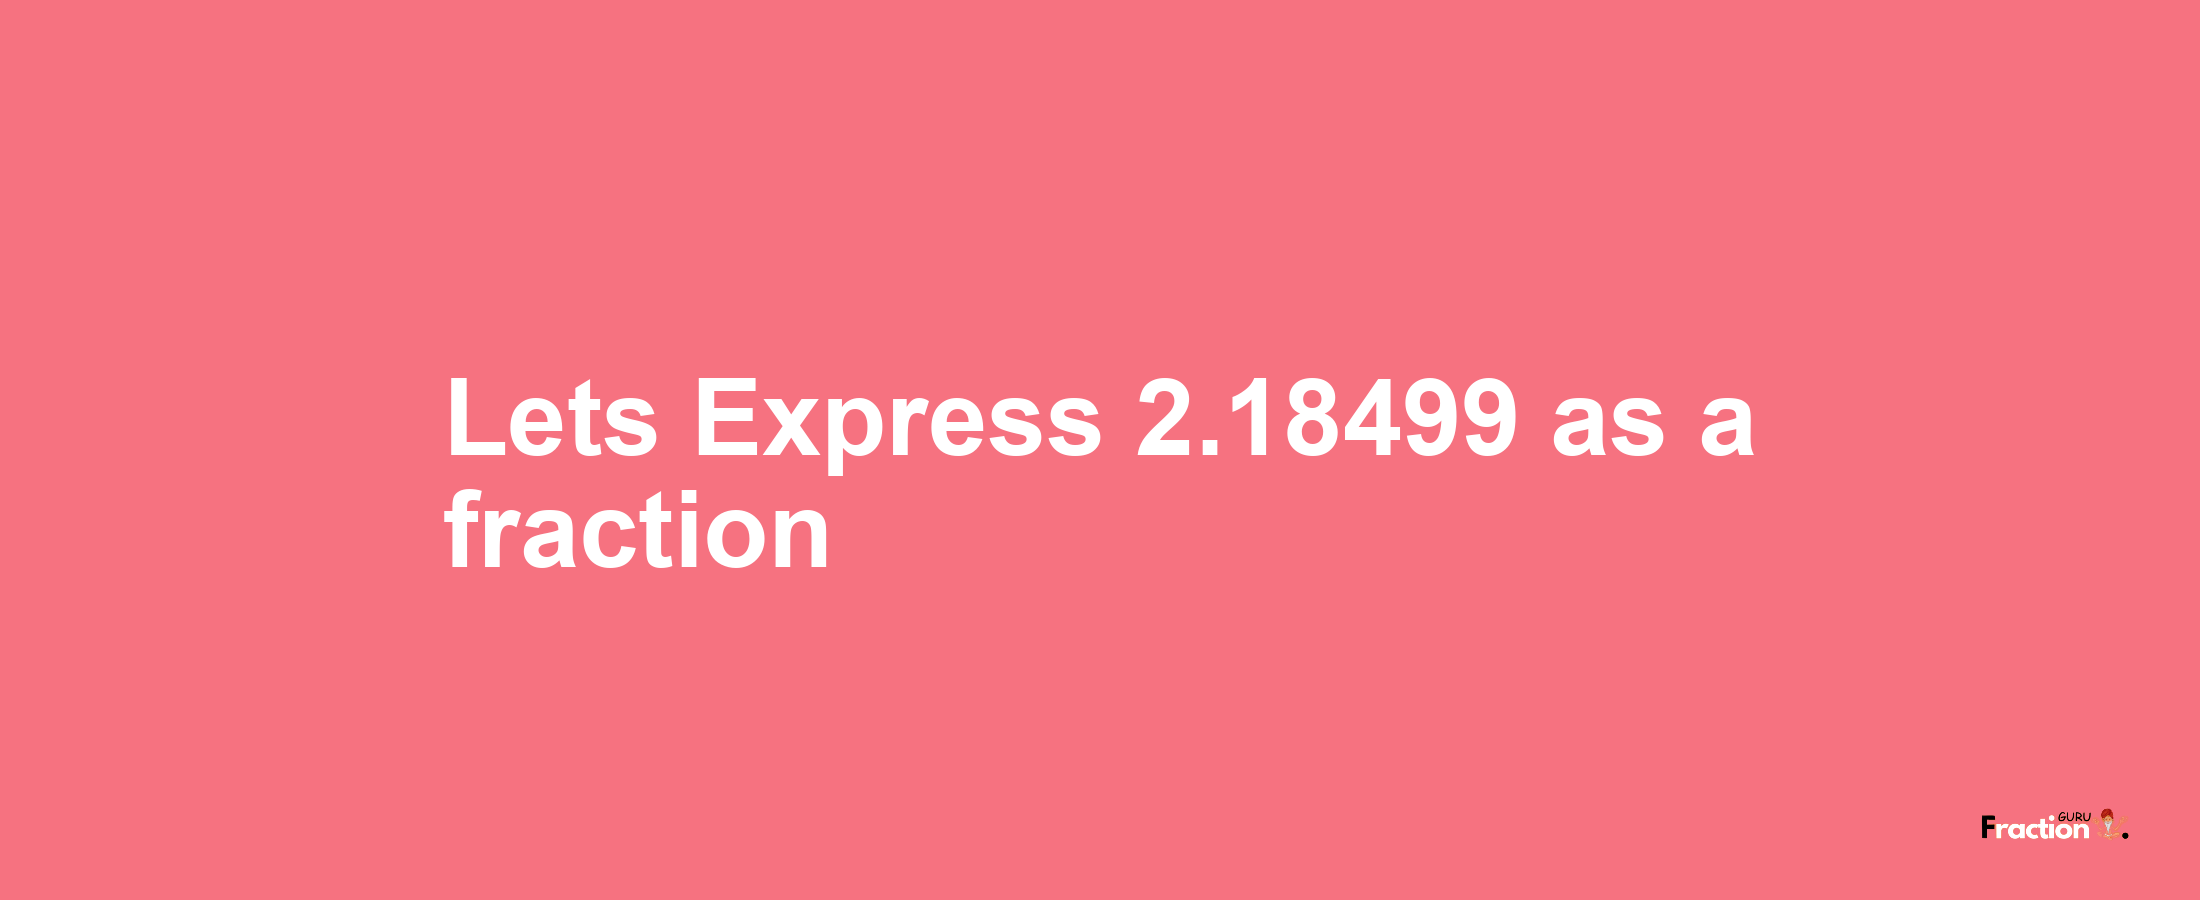 Lets Express 2.18499 as afraction